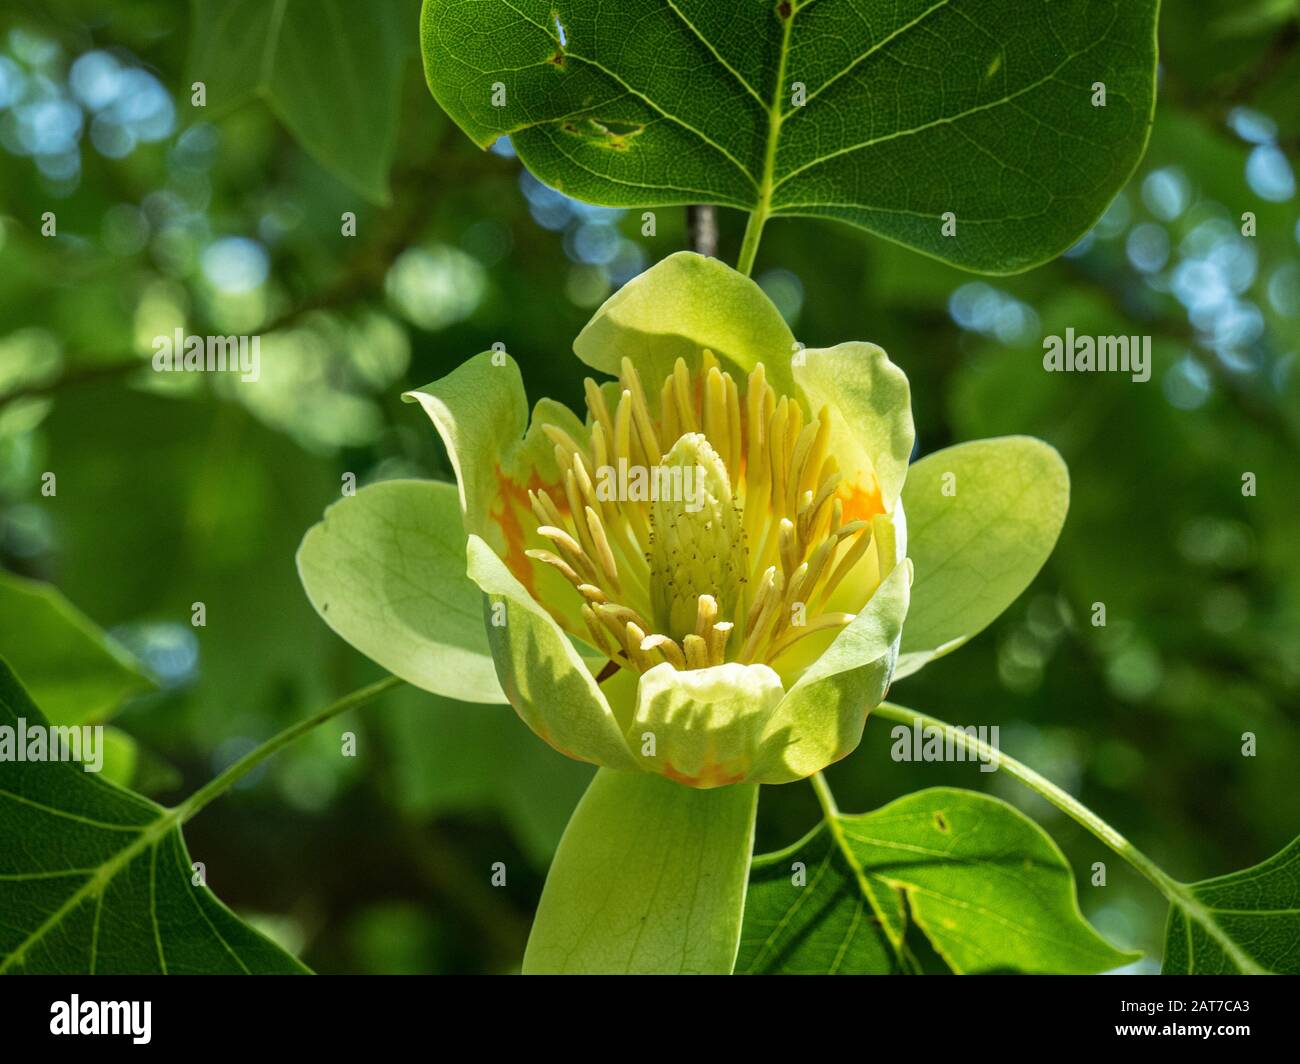 A close up of a single yellow flower of the tulip tree Liriodendron tulipifera Stock Photo